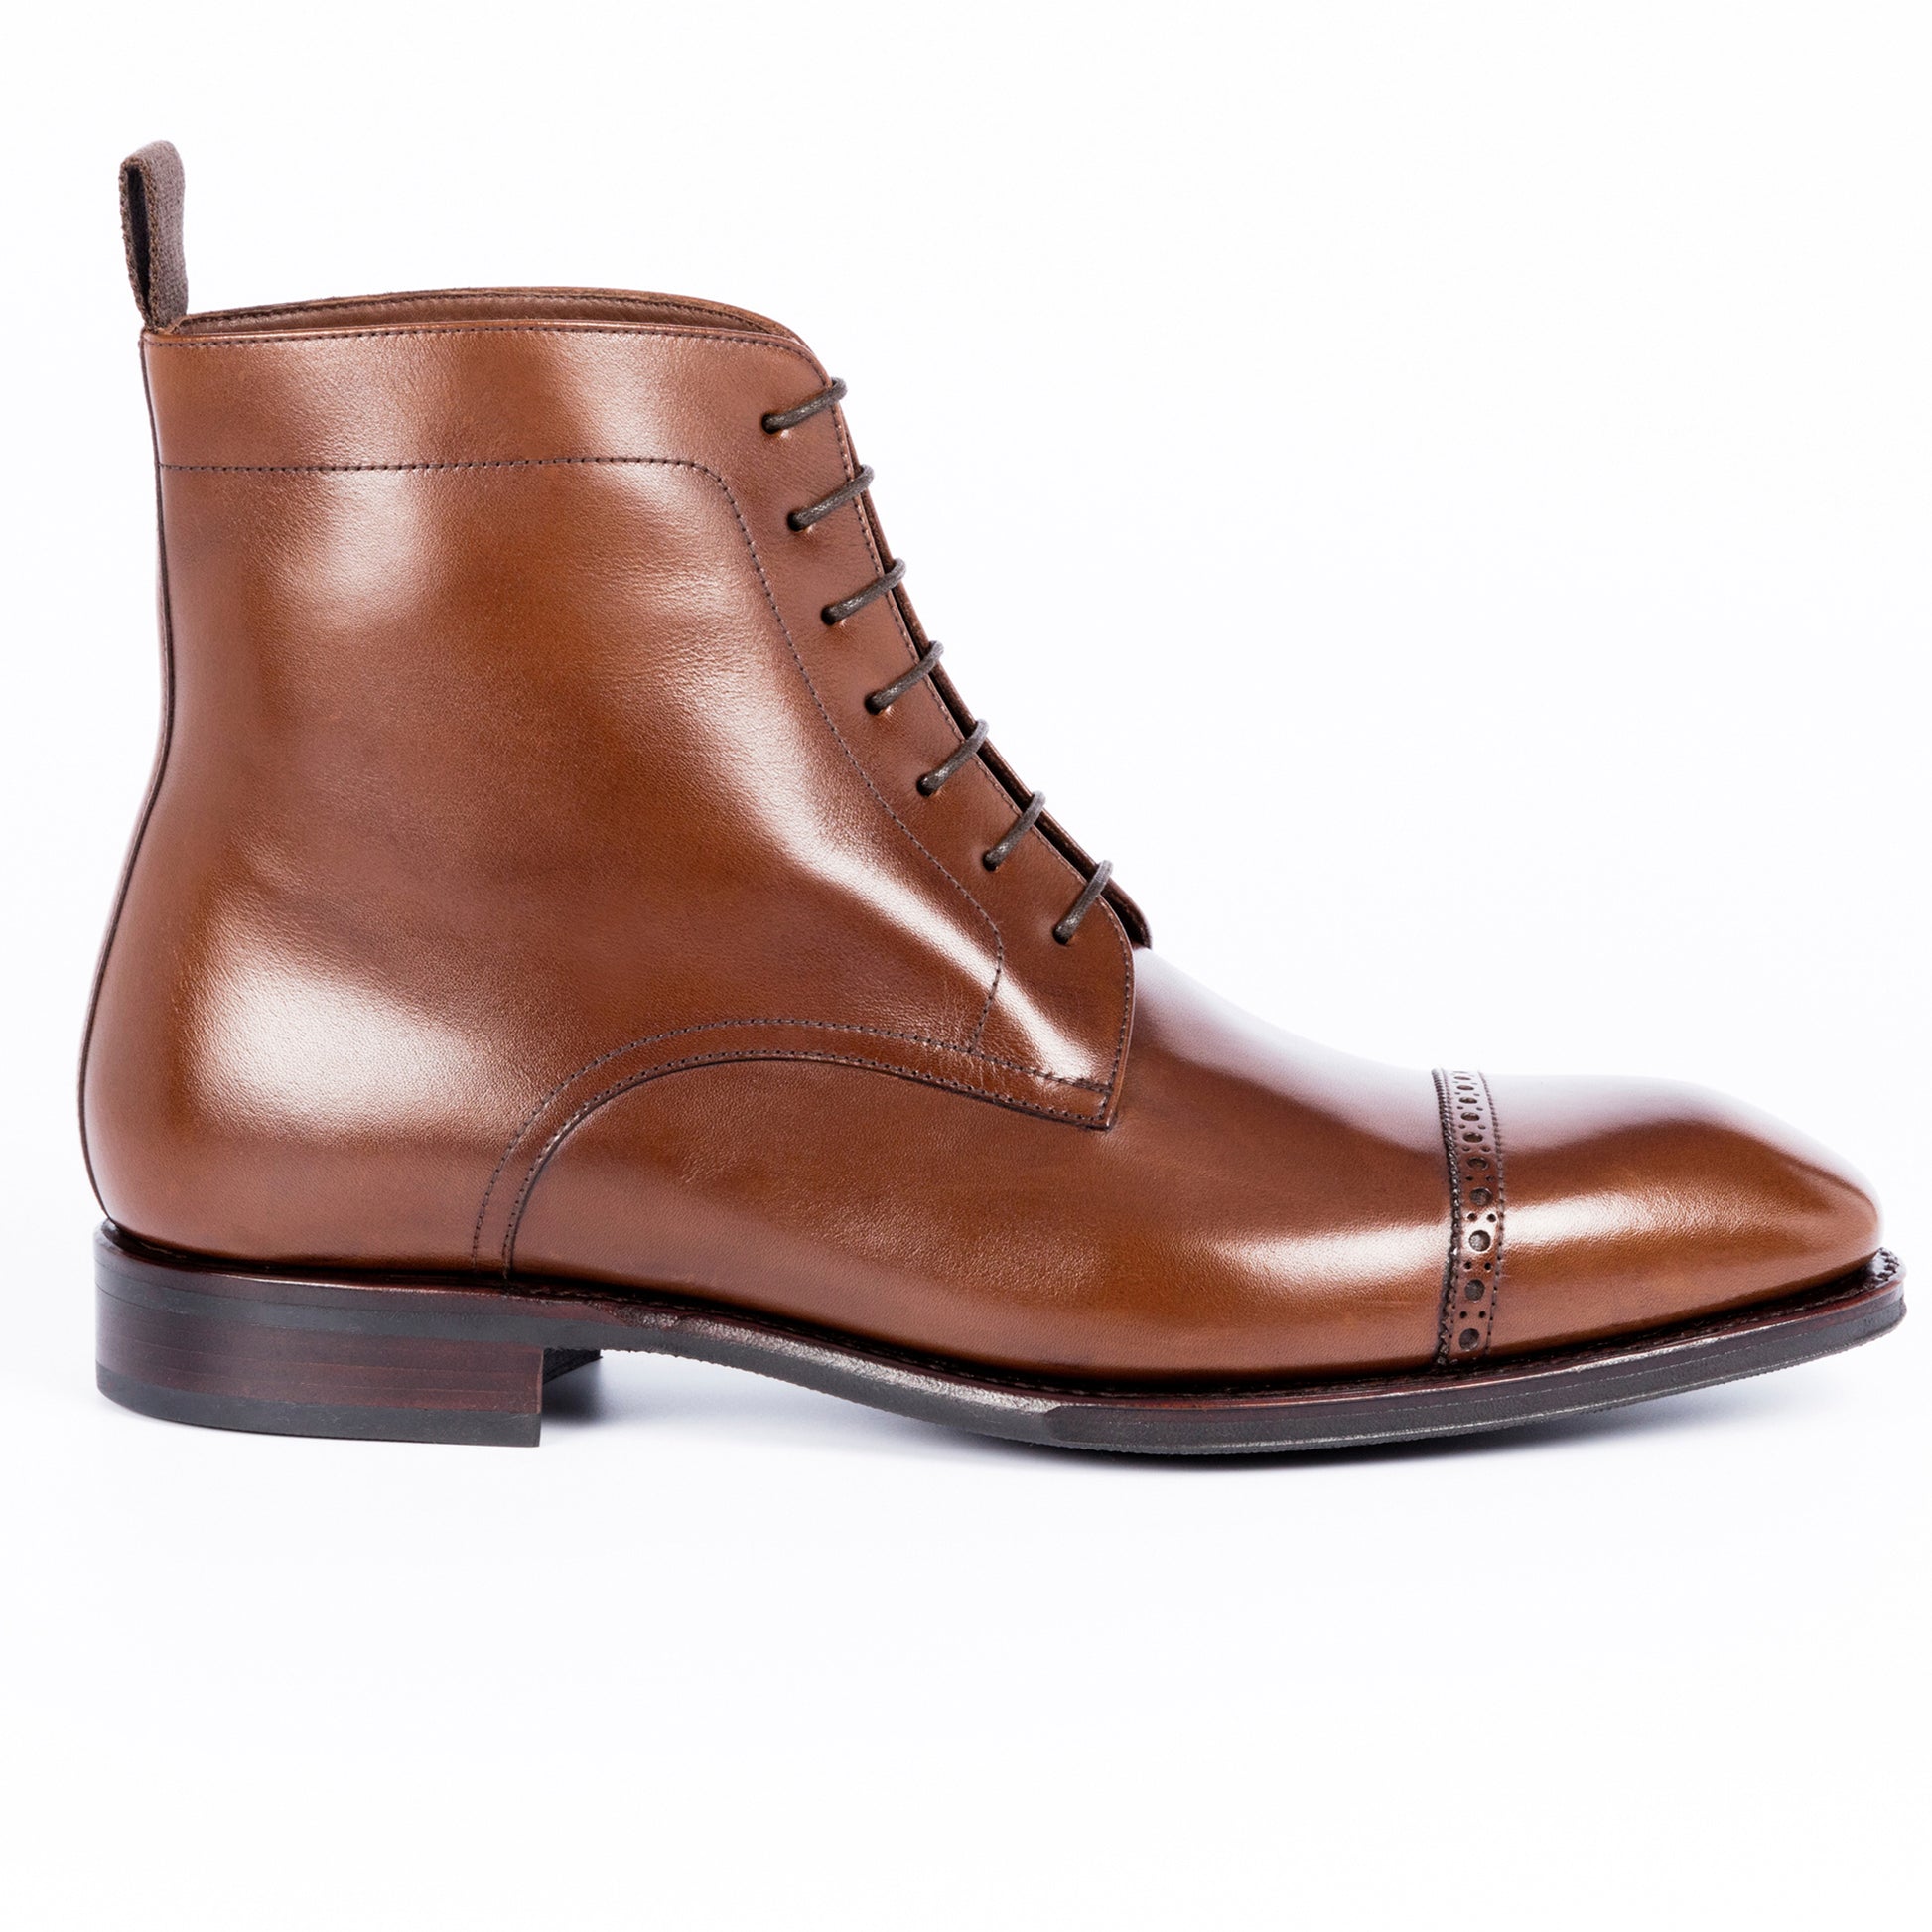 TLB Mallorca leather shoes 575 / ALAN / VEGANO BROWN